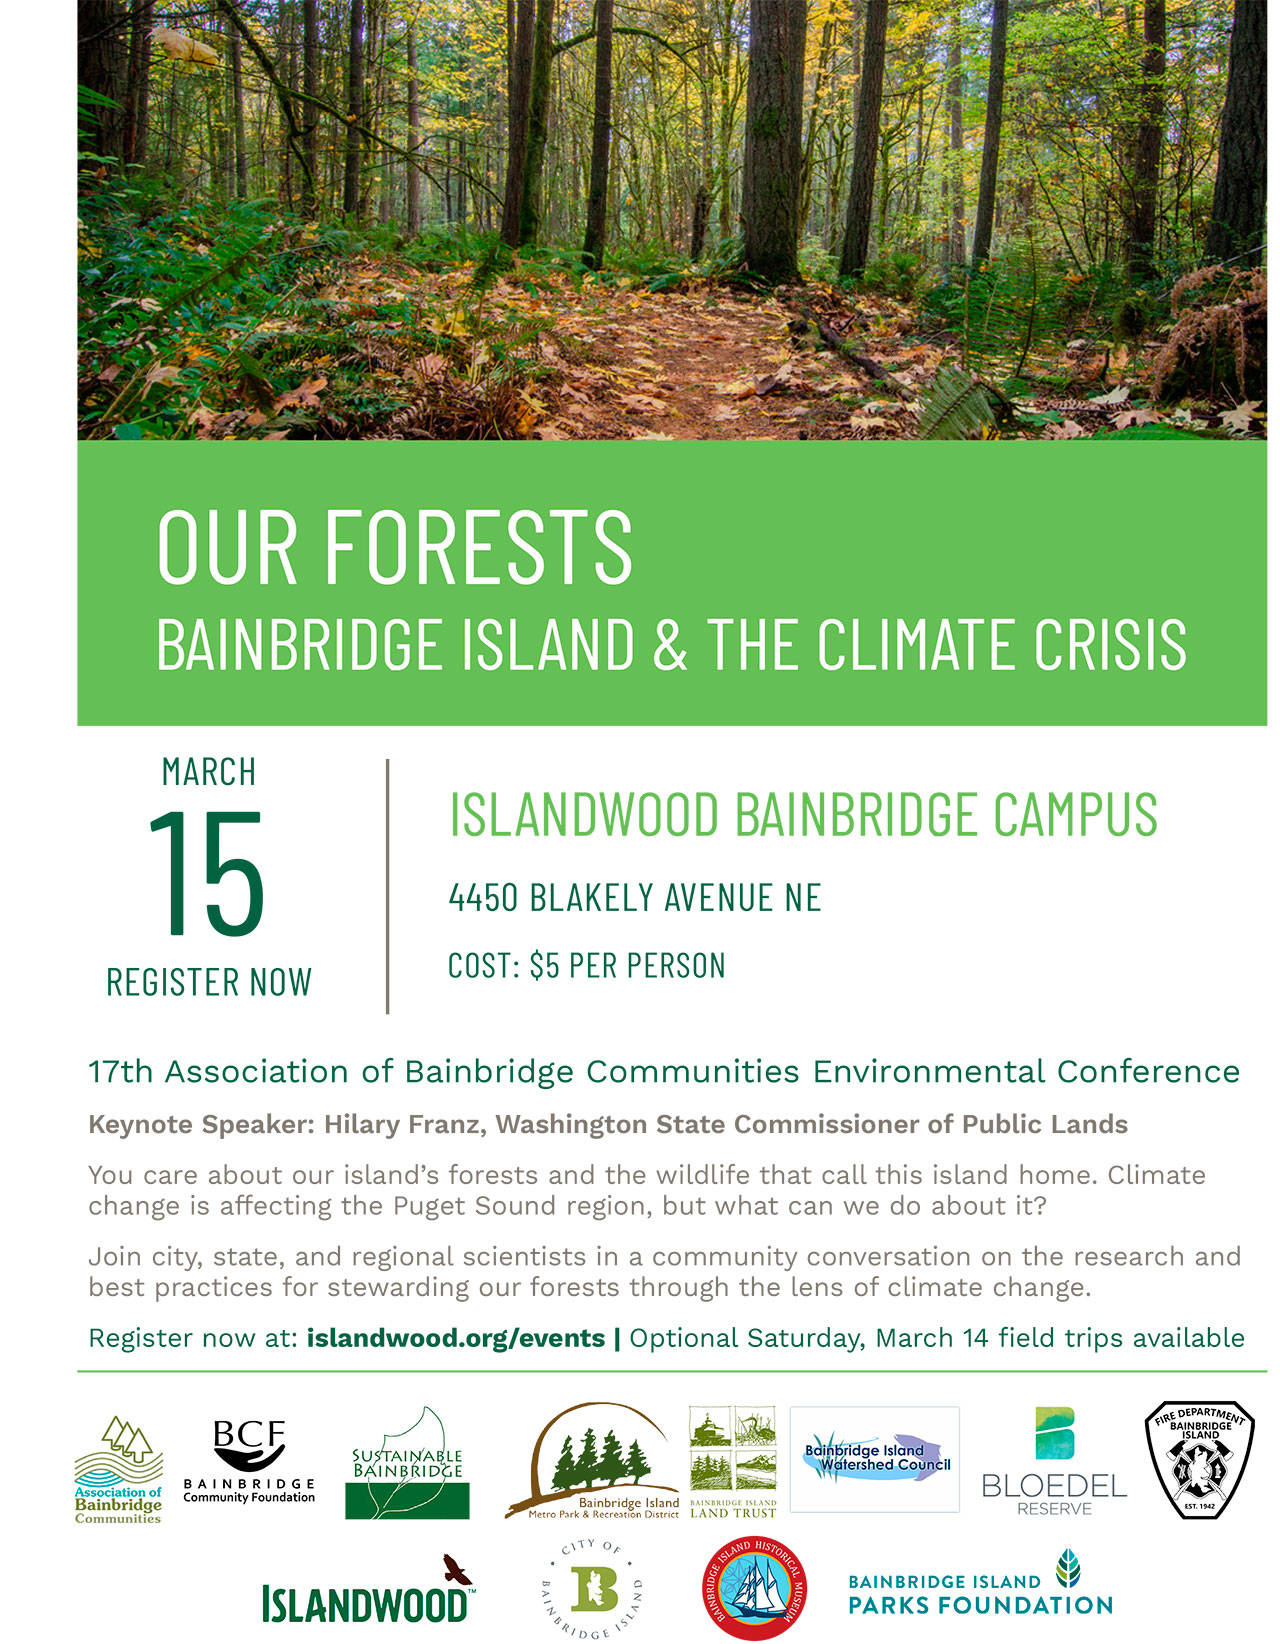 Image courtesy of Douglas Crist | “Our Forests: Bainbridge Island and the Climate Crisis” is the focus of the 17th Association of Bainbridge Communities Environmental Conference, to be held from 12:30 to 4:30 p.m. Sunday, March 15 at IslandWood.